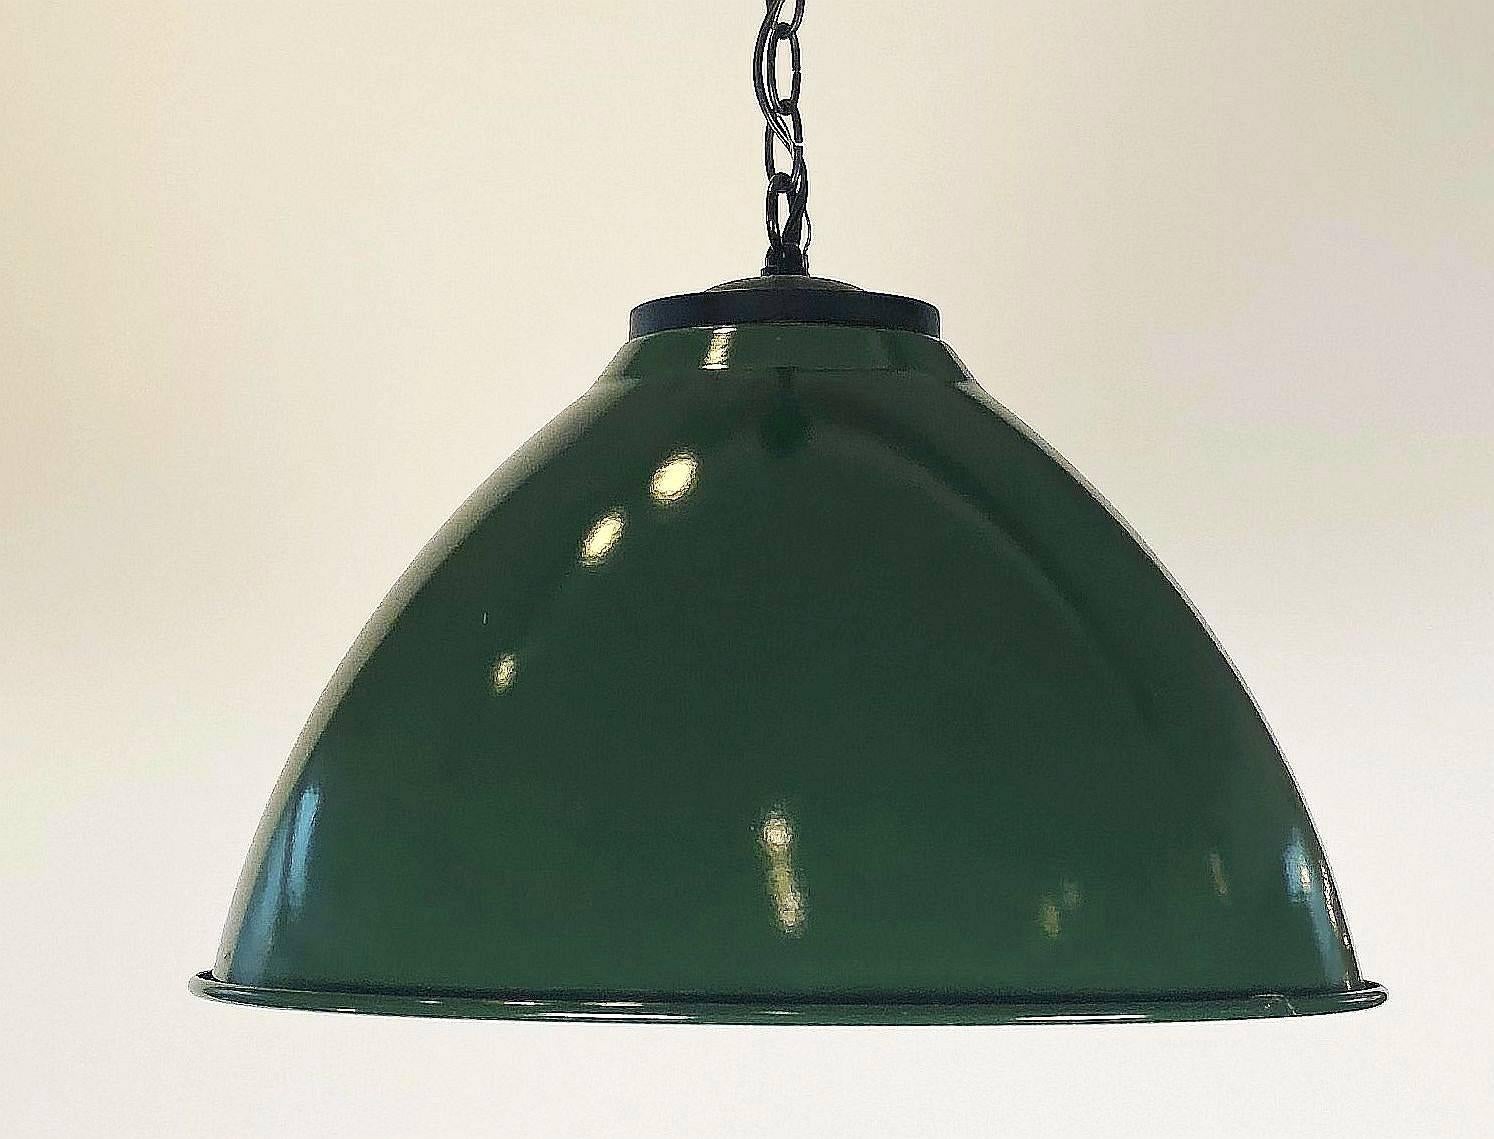 Green Tole Industrial Hanging Lamps or Lanterns from England (18 1/4